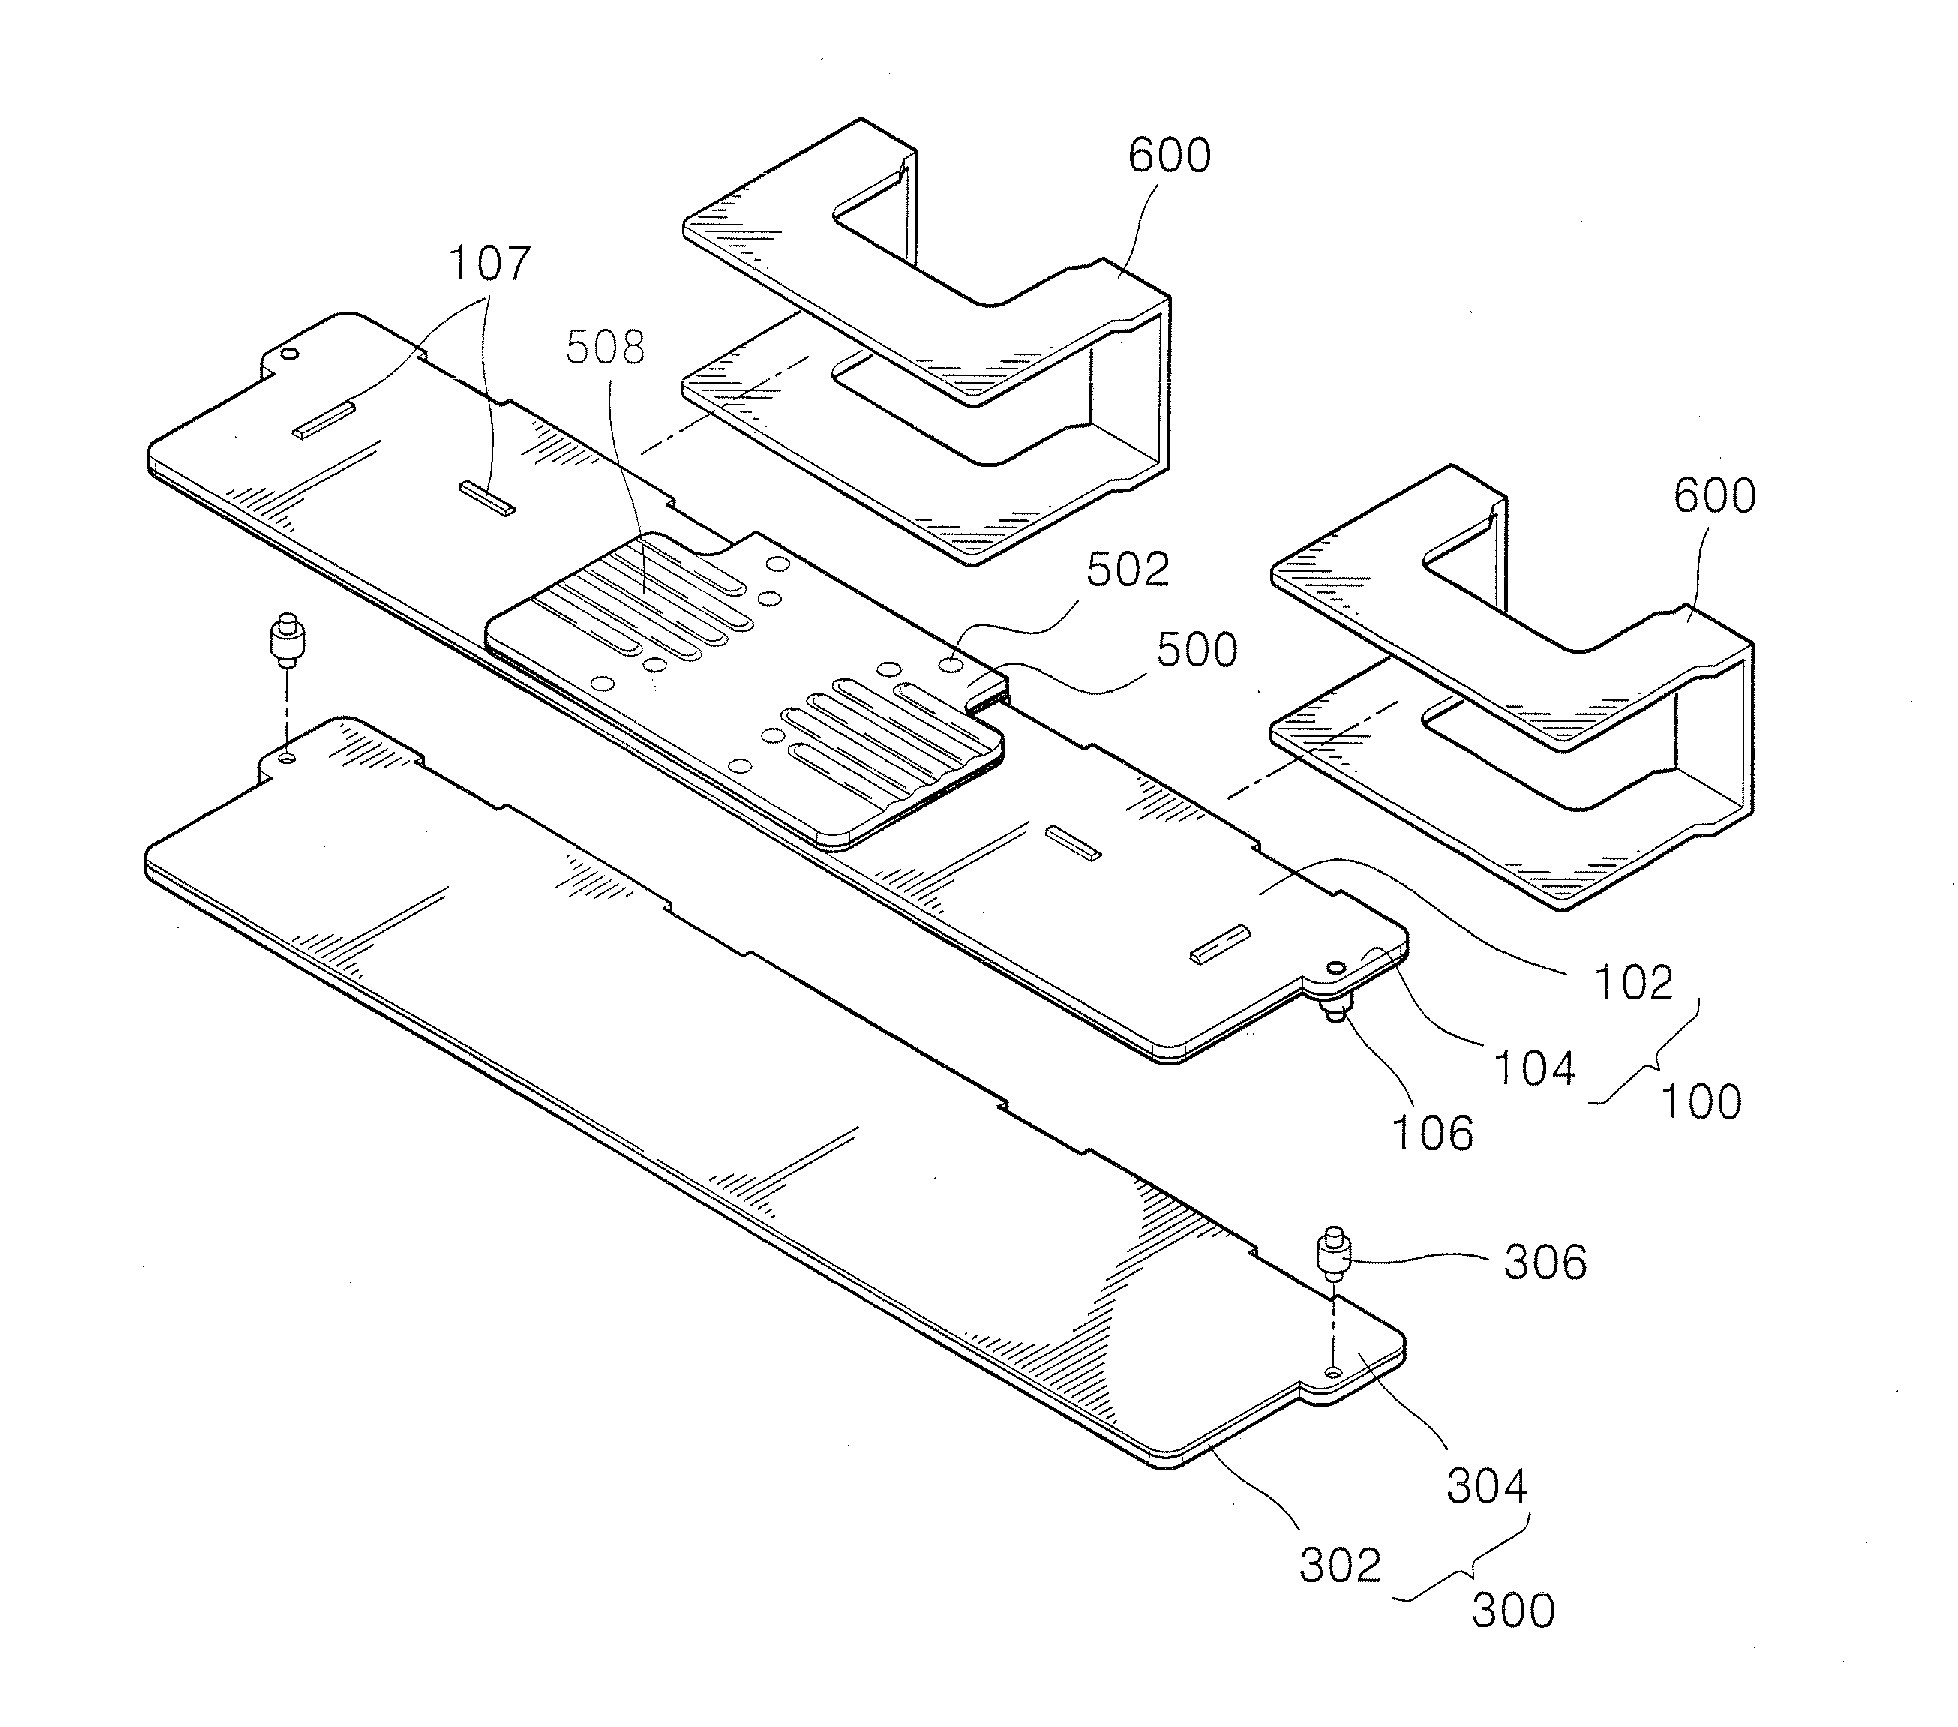 Heat sink and memory module using the same